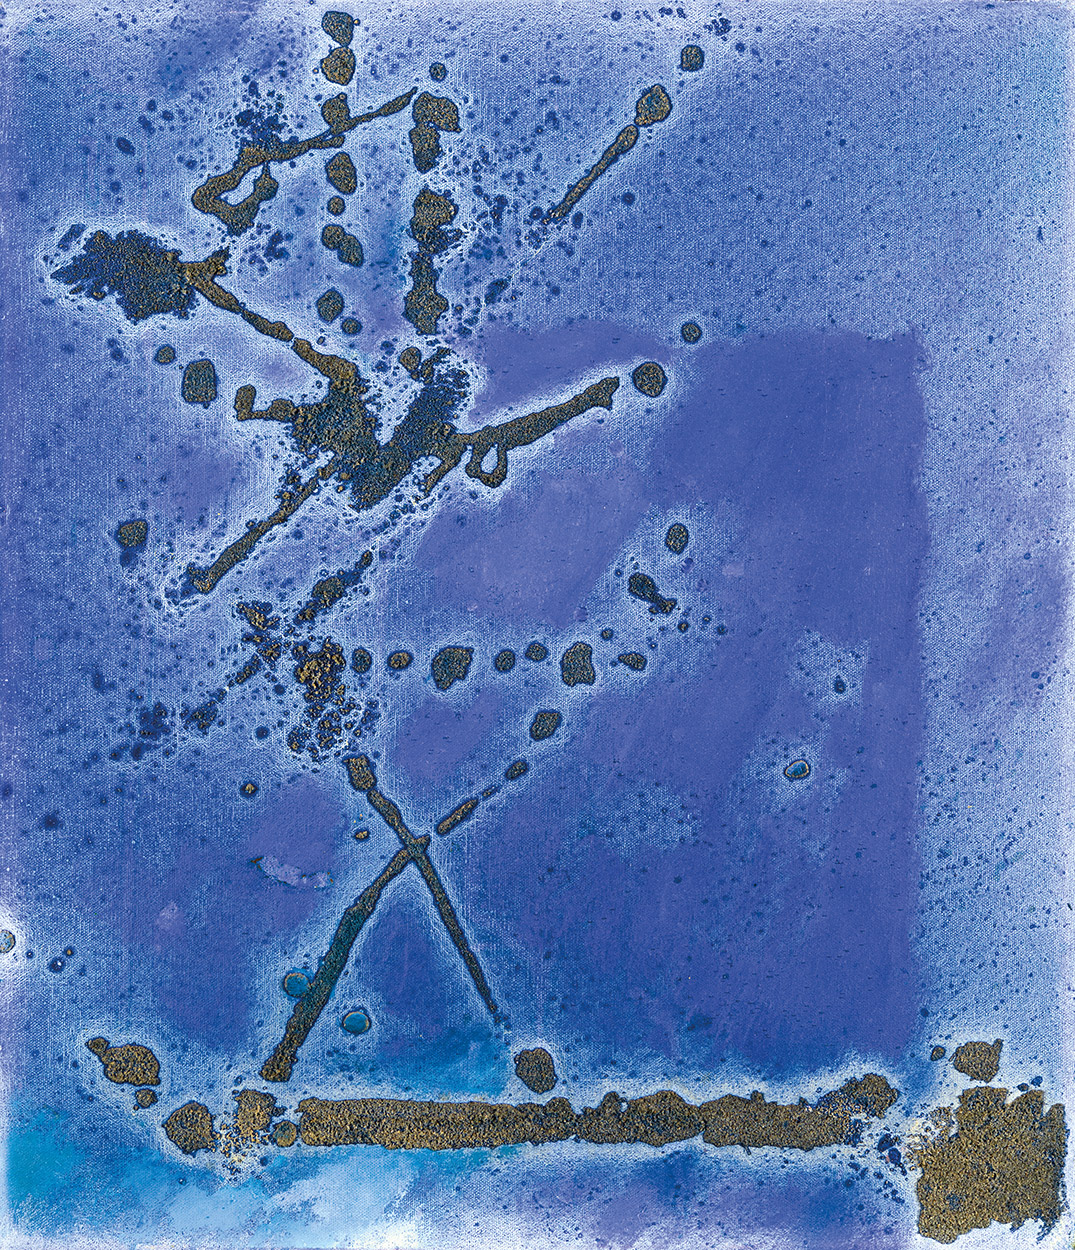 Kepes György (1906-2001) Composition in Blue, 1980